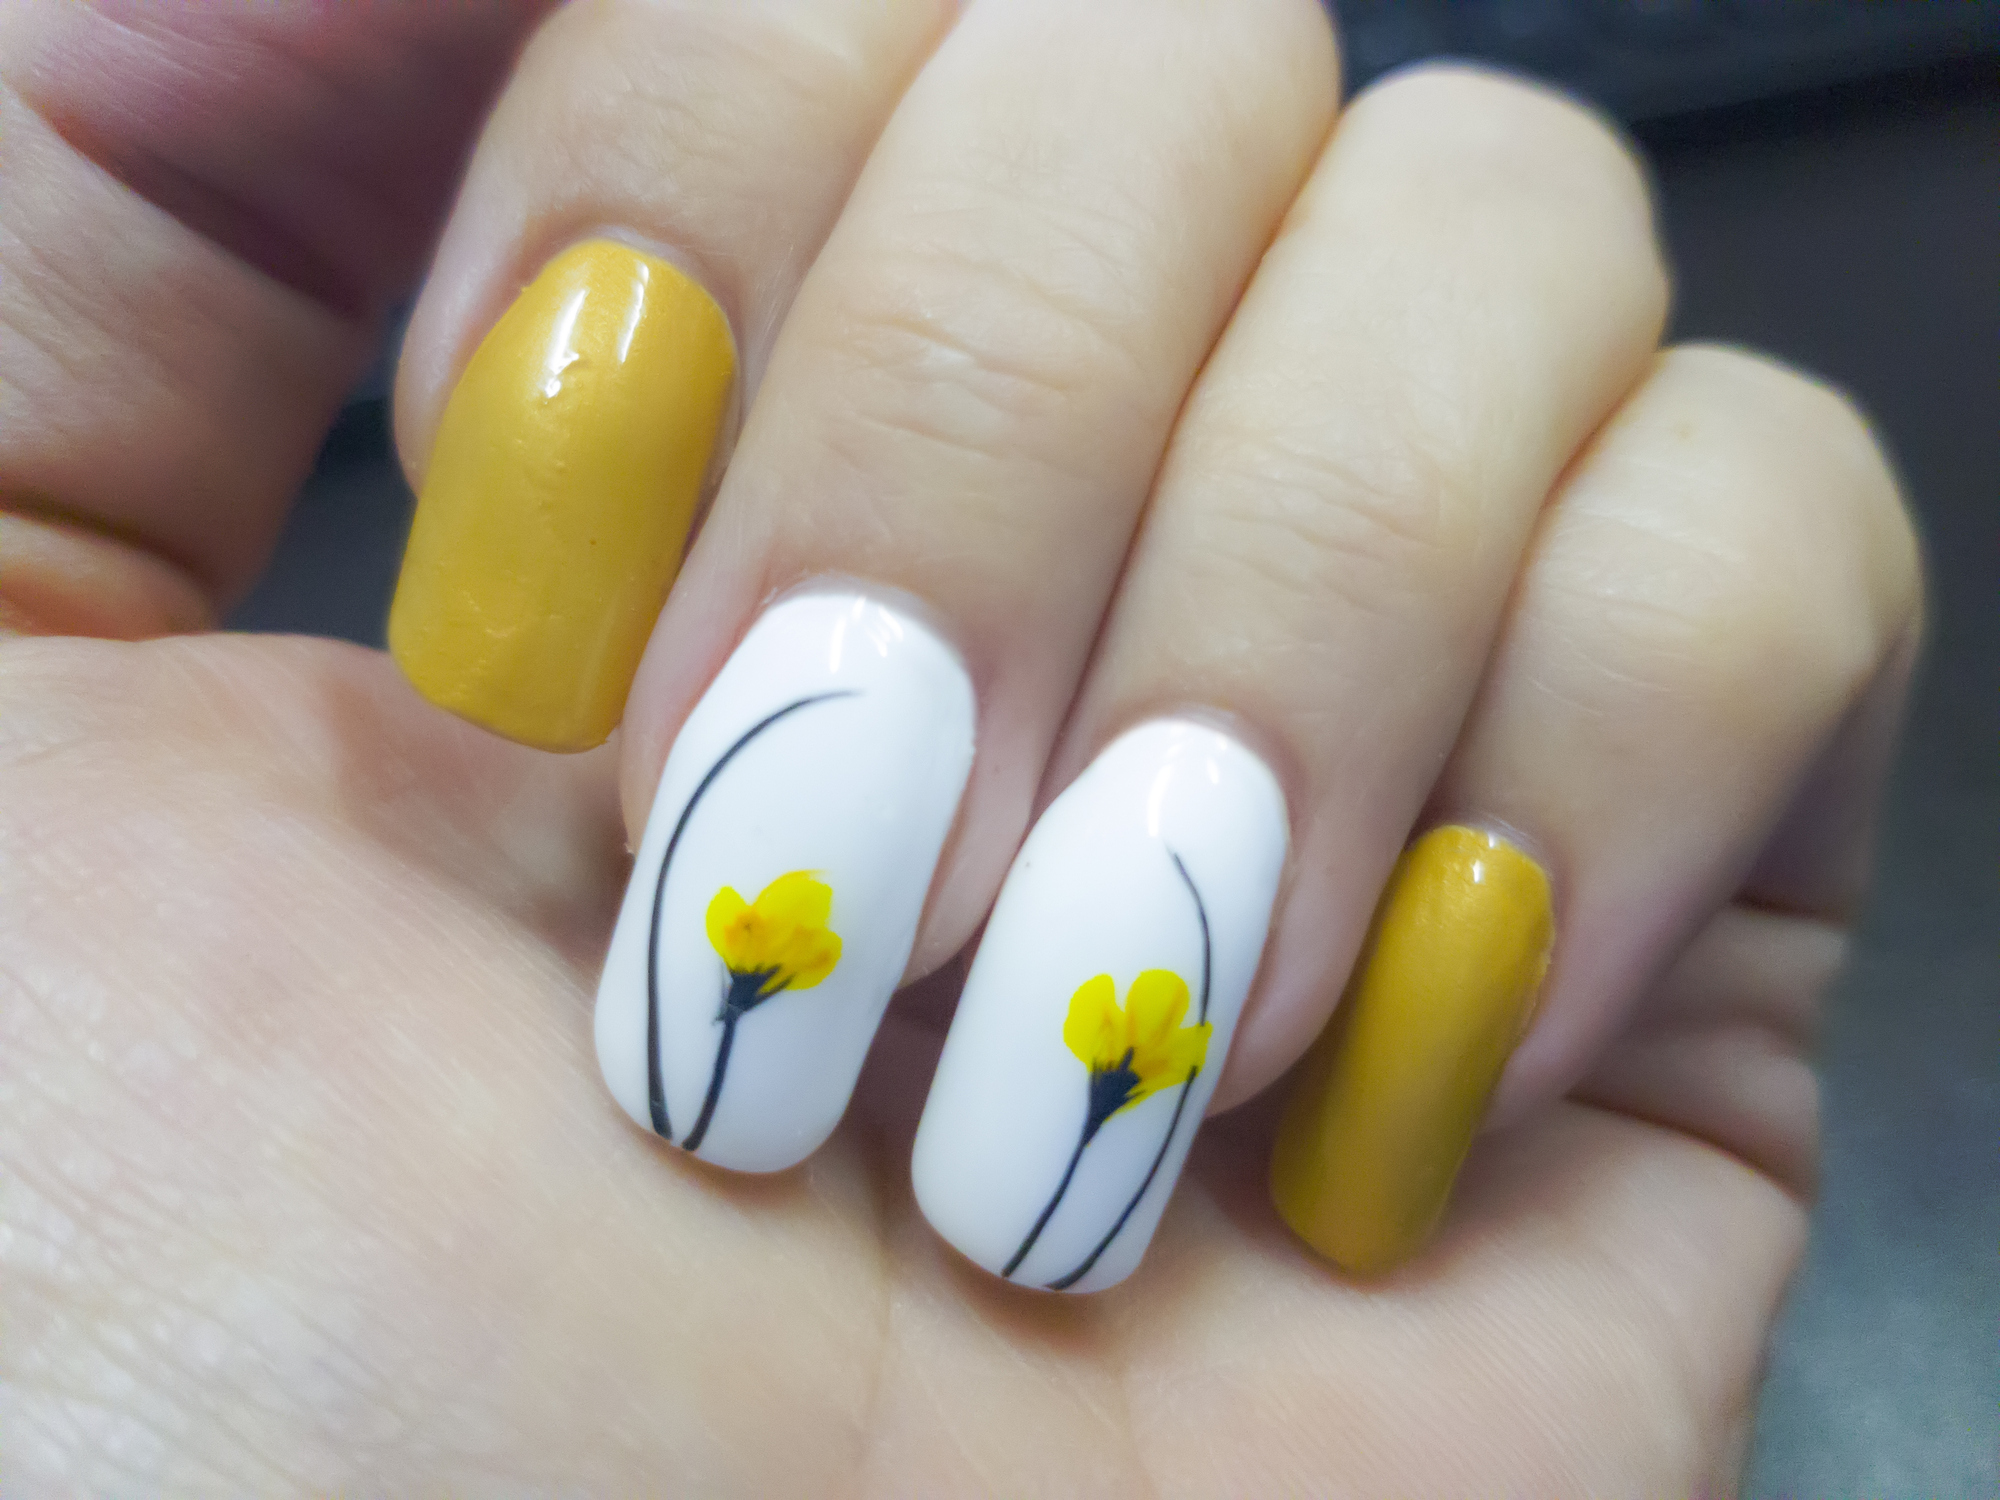 Nail Colors : Shop Online Genuine Nail Art Products at best Price in UAE |  nazih.ae